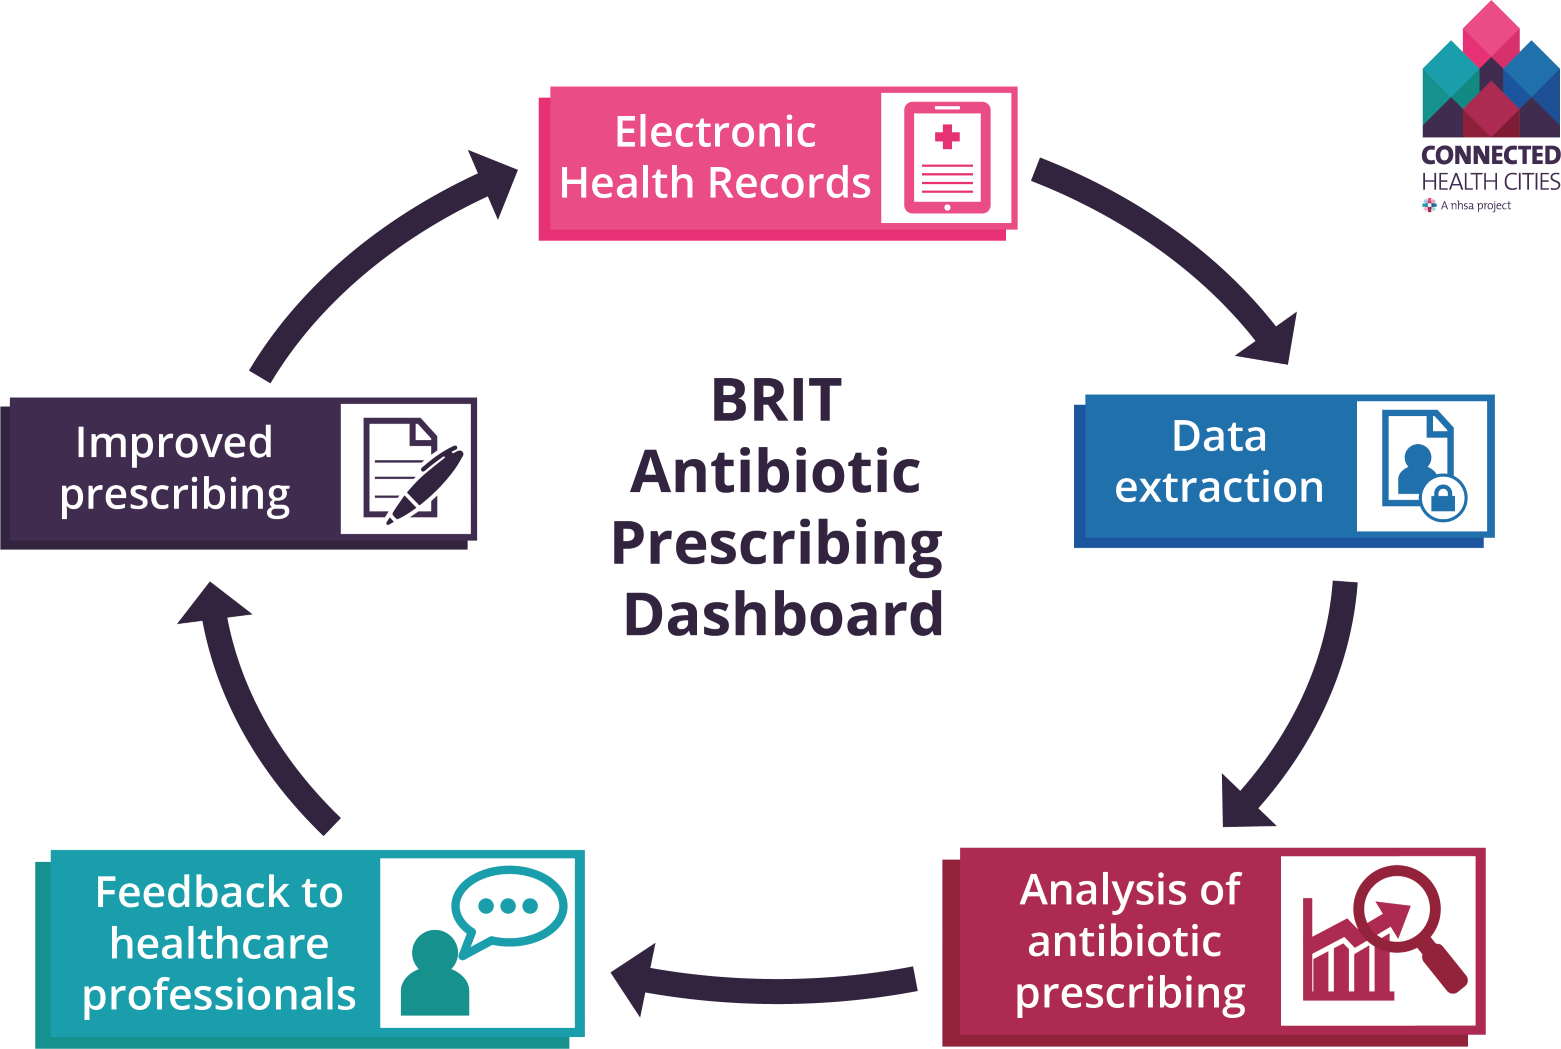 Our project is part of a learning health system implementing a five step cycle. The cycle starts with routine health records, then data are extracted, then these are analysed by statisticians, then the analytics and insights are presented back to health care professionals, then they can improve their prescribing. This website  feeds back to health professionals advanced analytics about antibiotic prescribing in general practice.